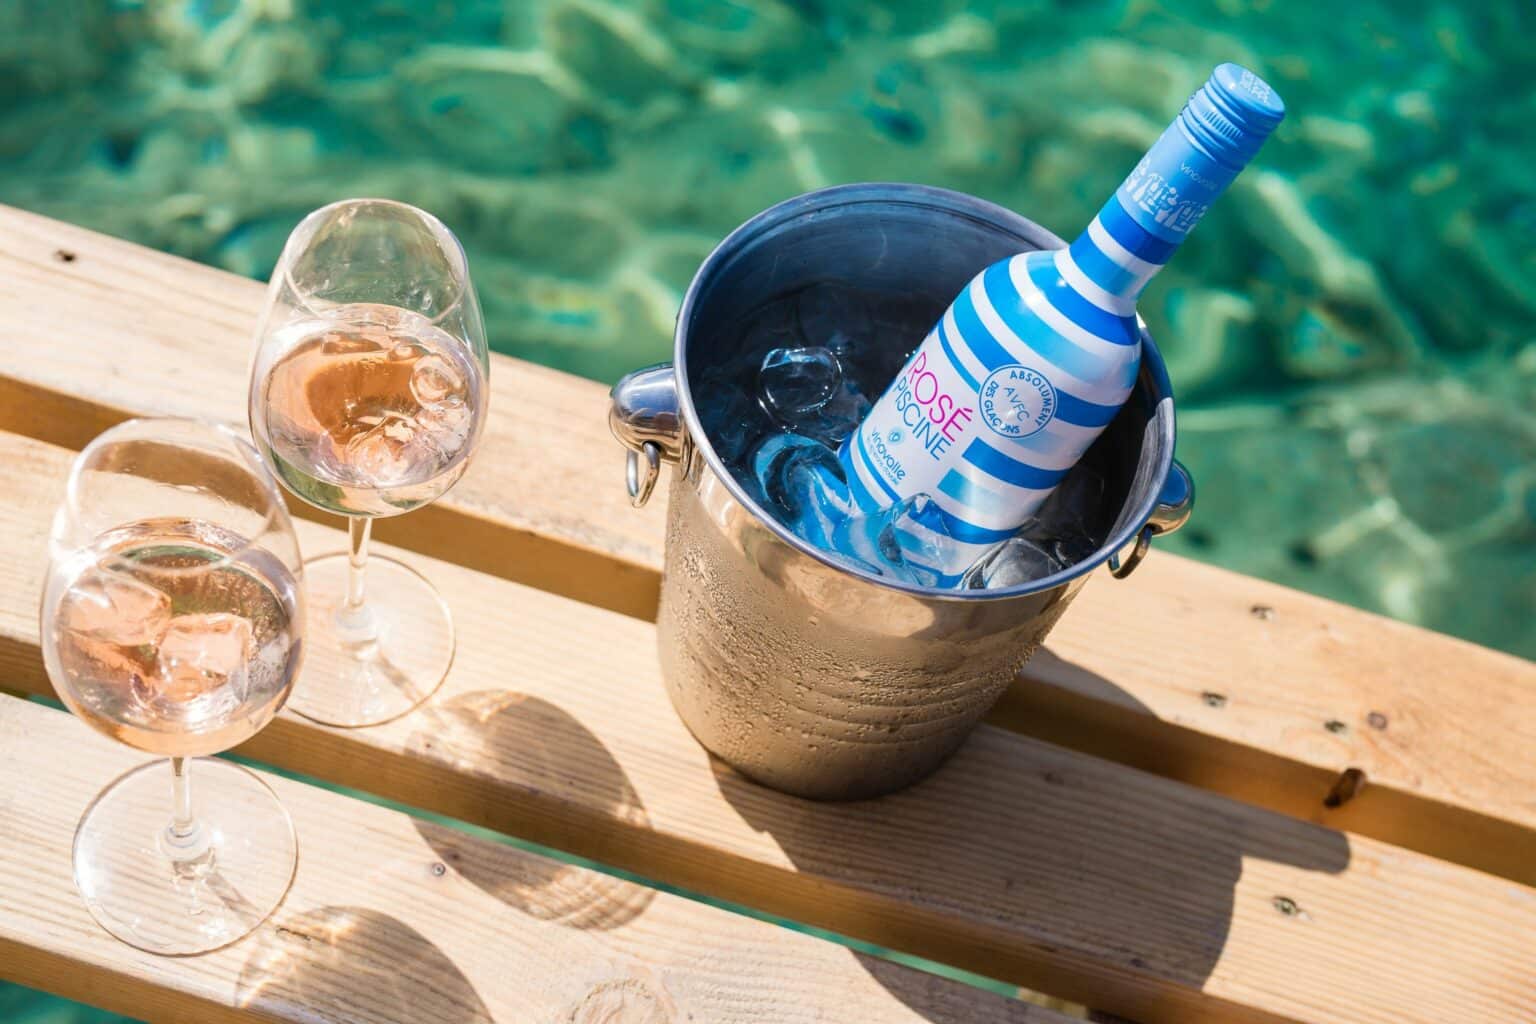 Rosé Piscine: A French Wine Served Over Ice